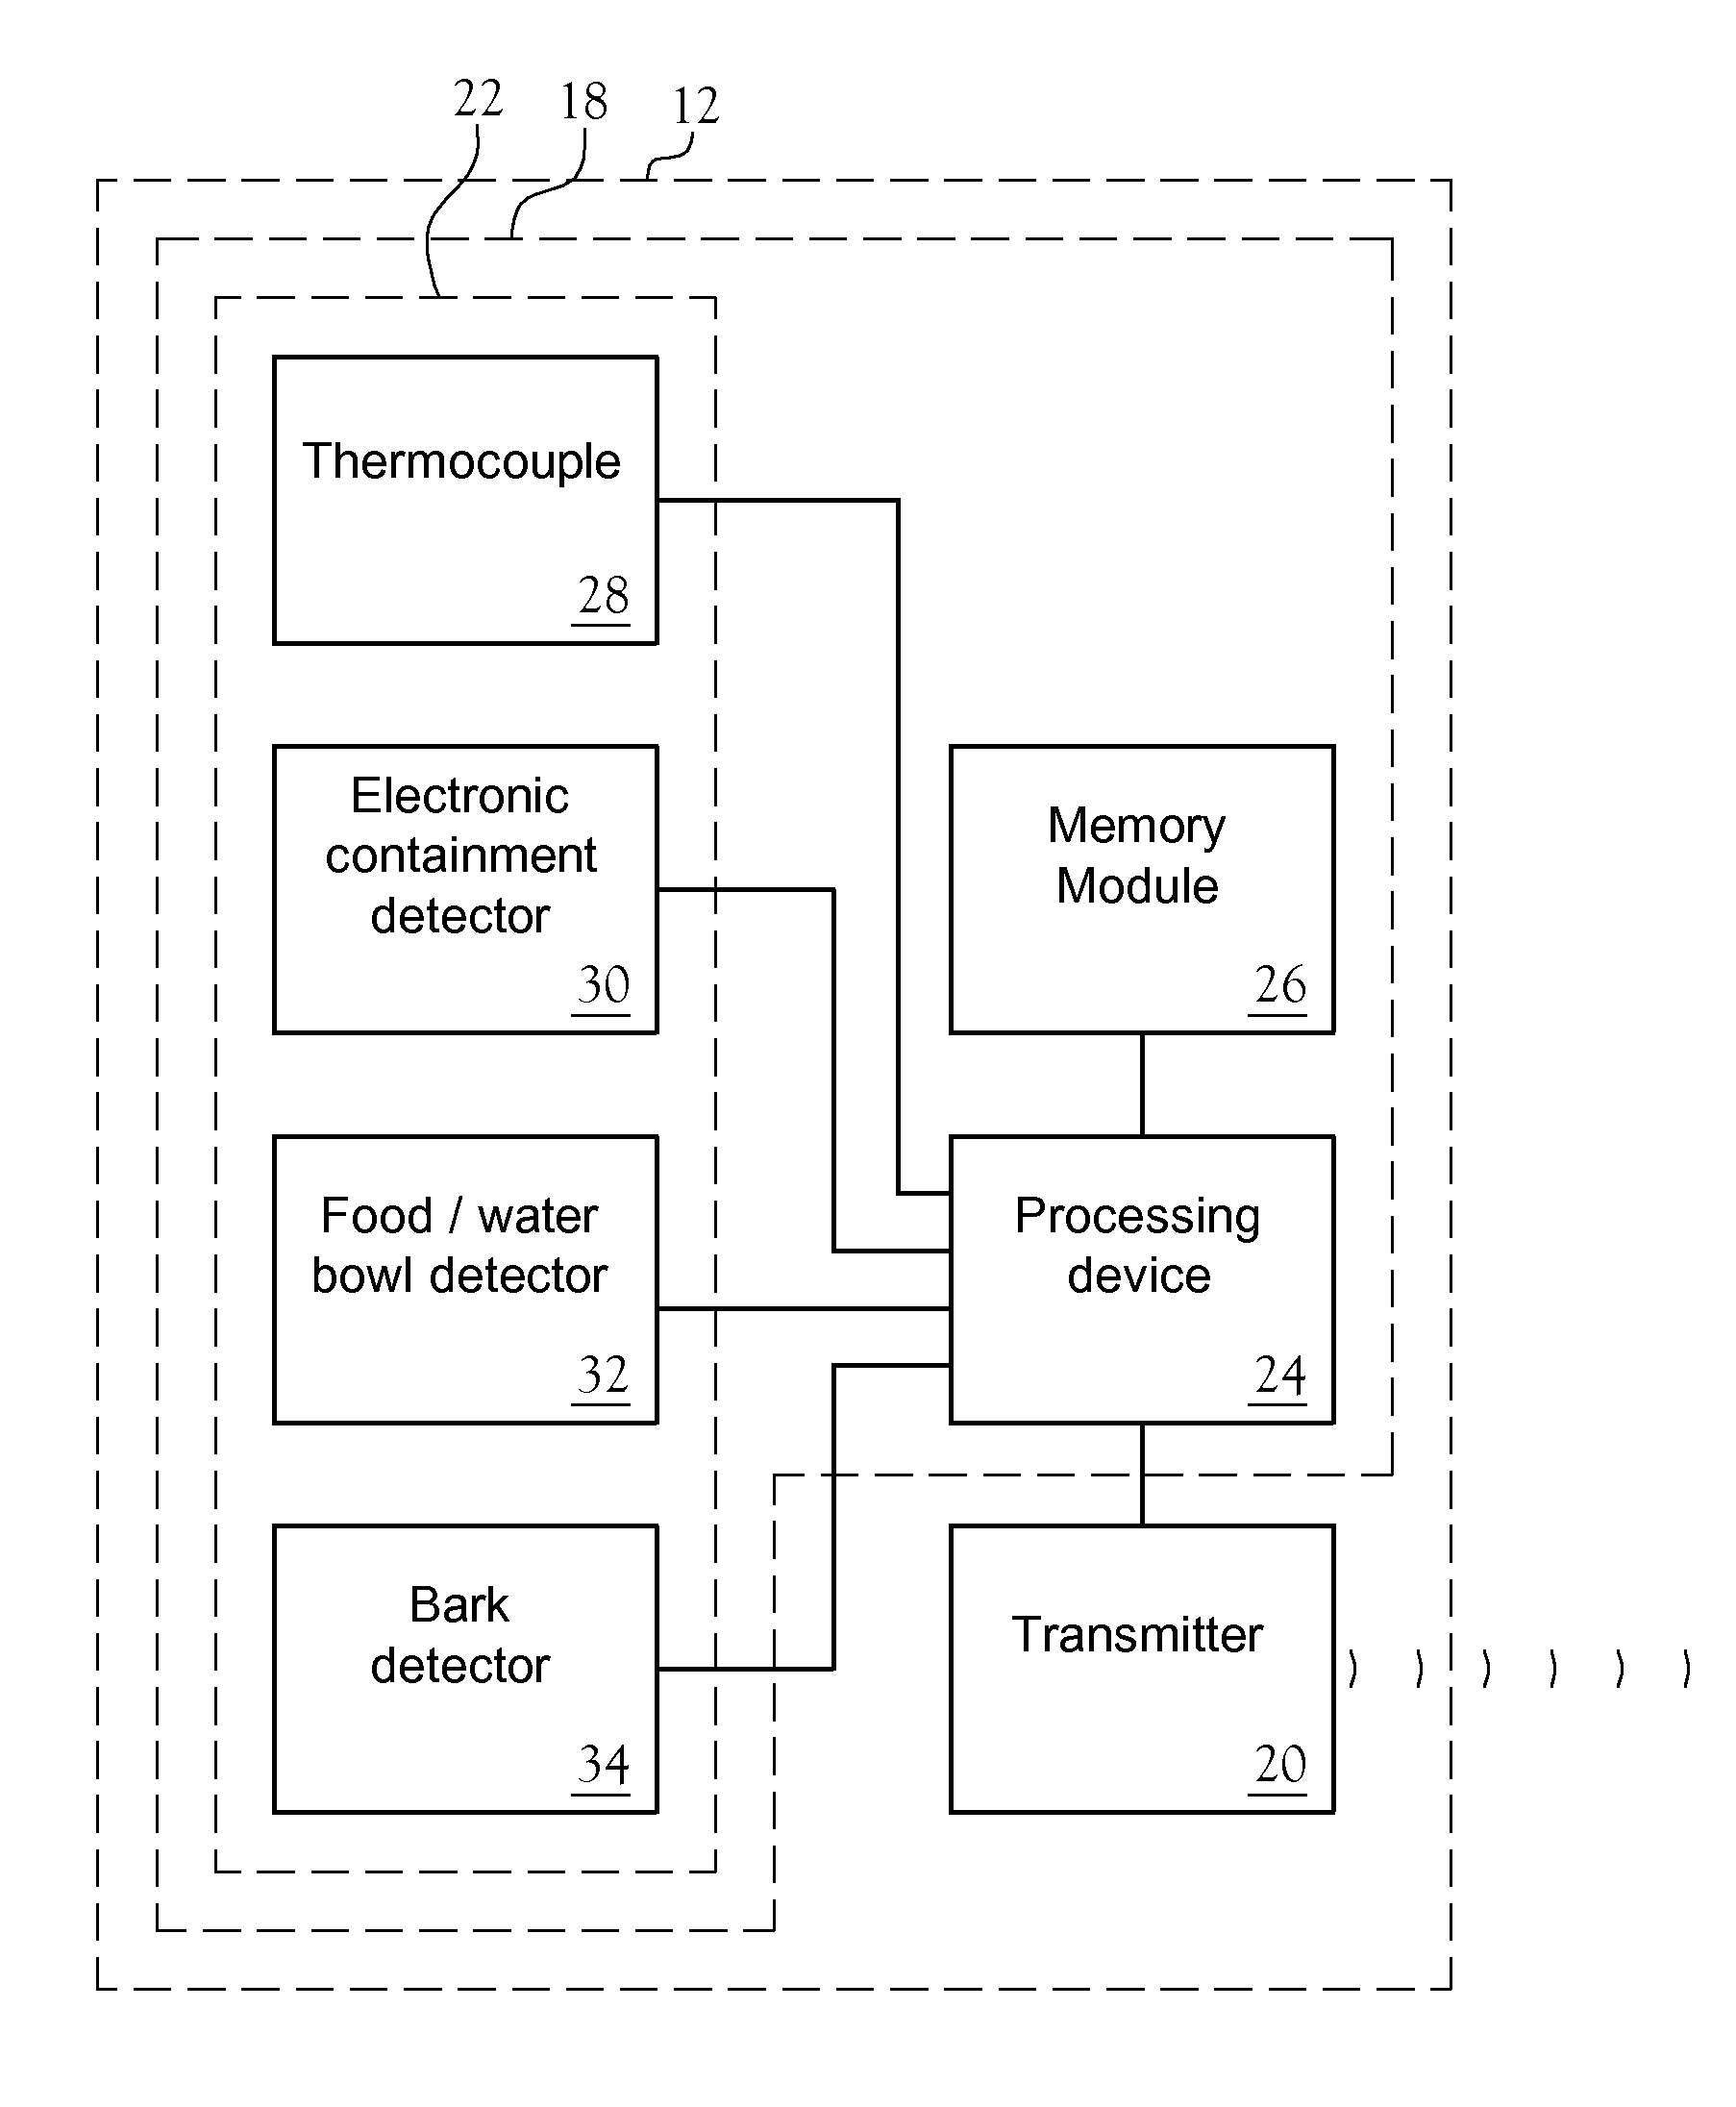 System for detecting information regarding an animal and communicating the information to a remote location